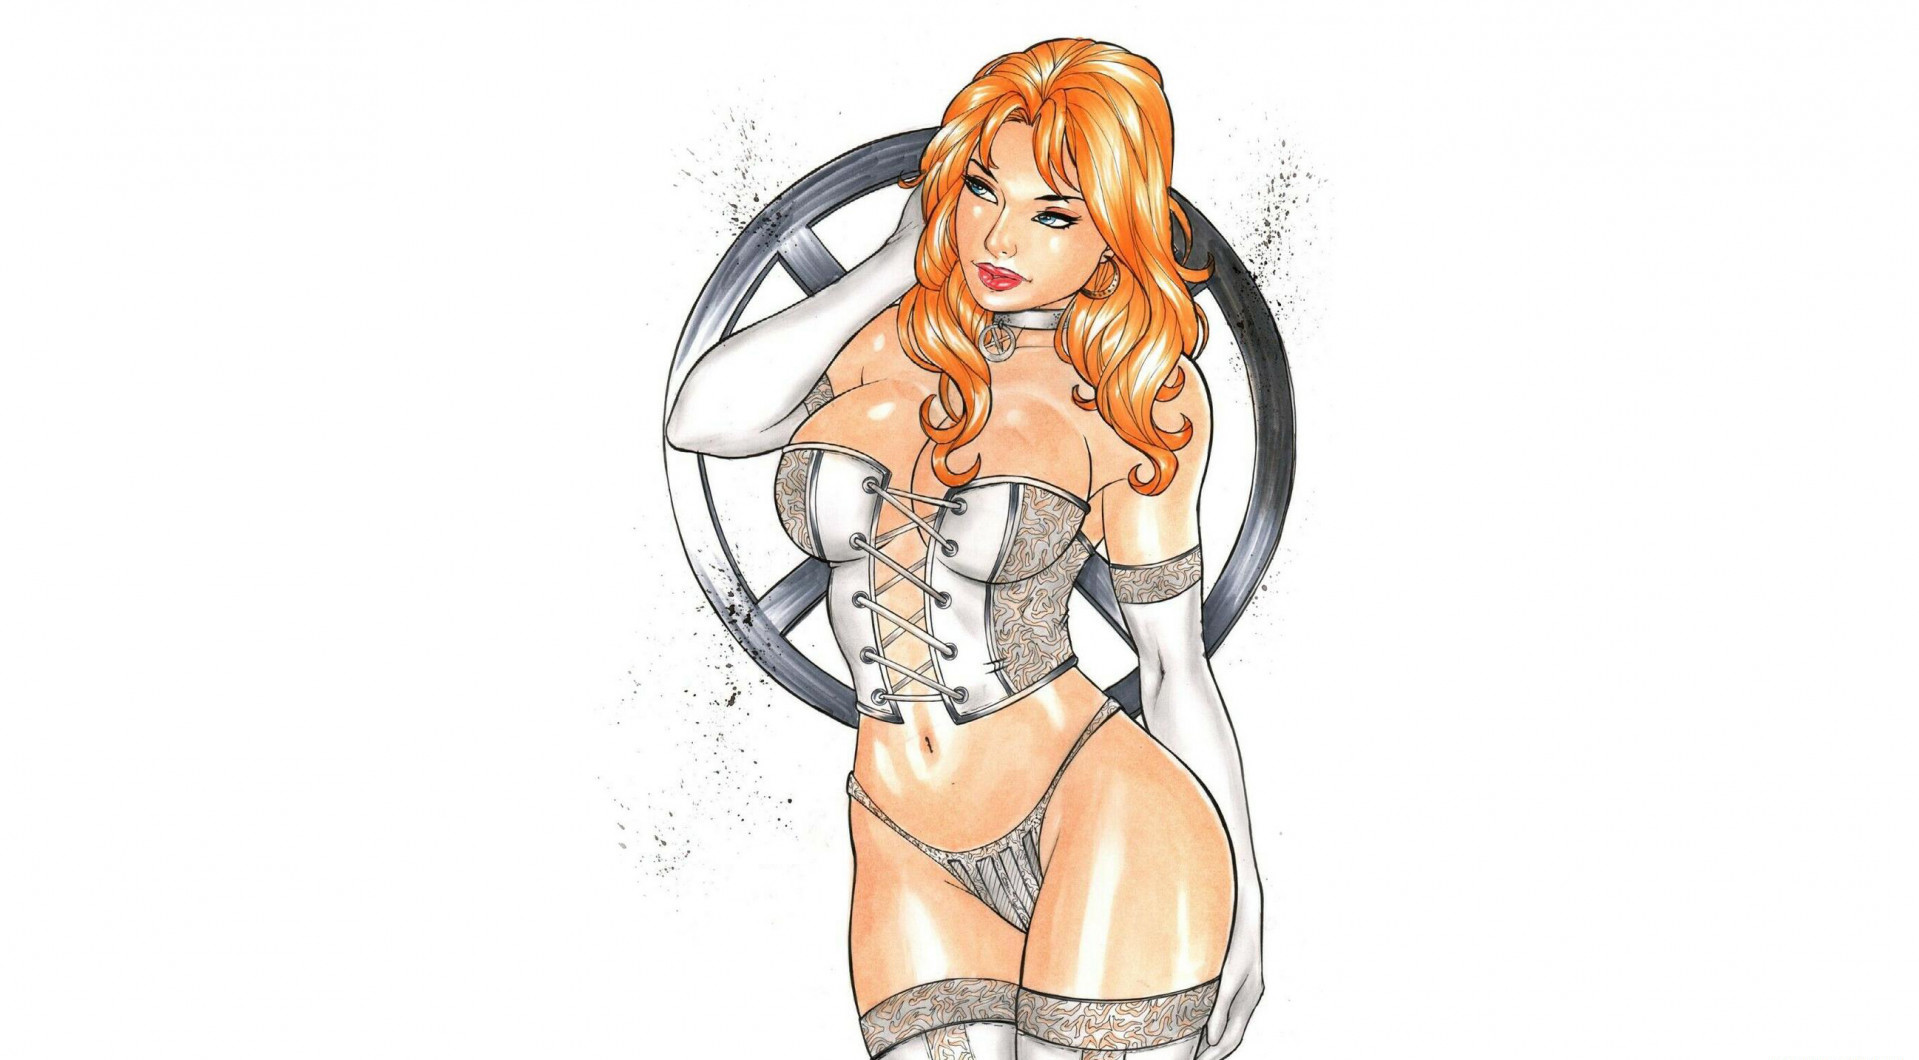 General 1919x1060 women drawing simple background white background redhead standing boobs big boobs panties curvy Emma Frost X-Men White Queen Marvel Comics lingerie